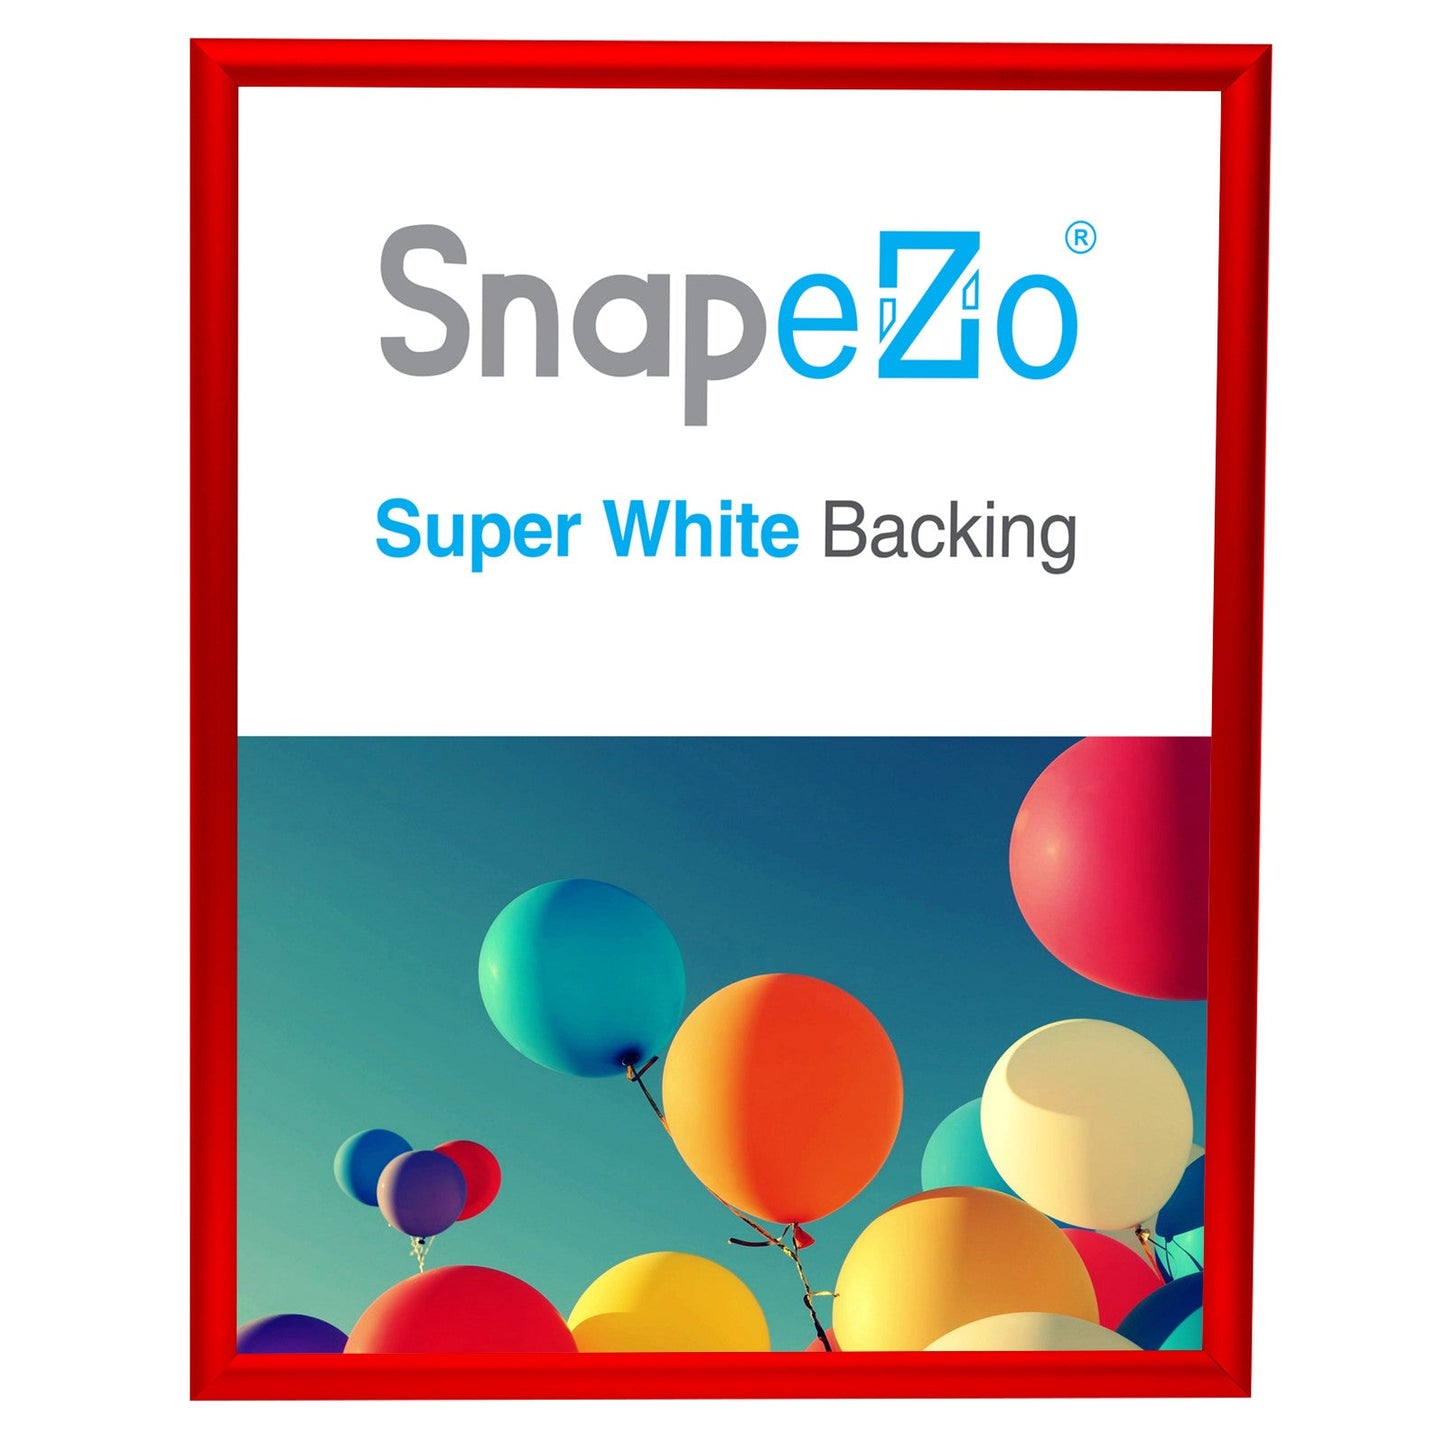 22x28 Red SnapeZo® Snap Frame - 1" Profile